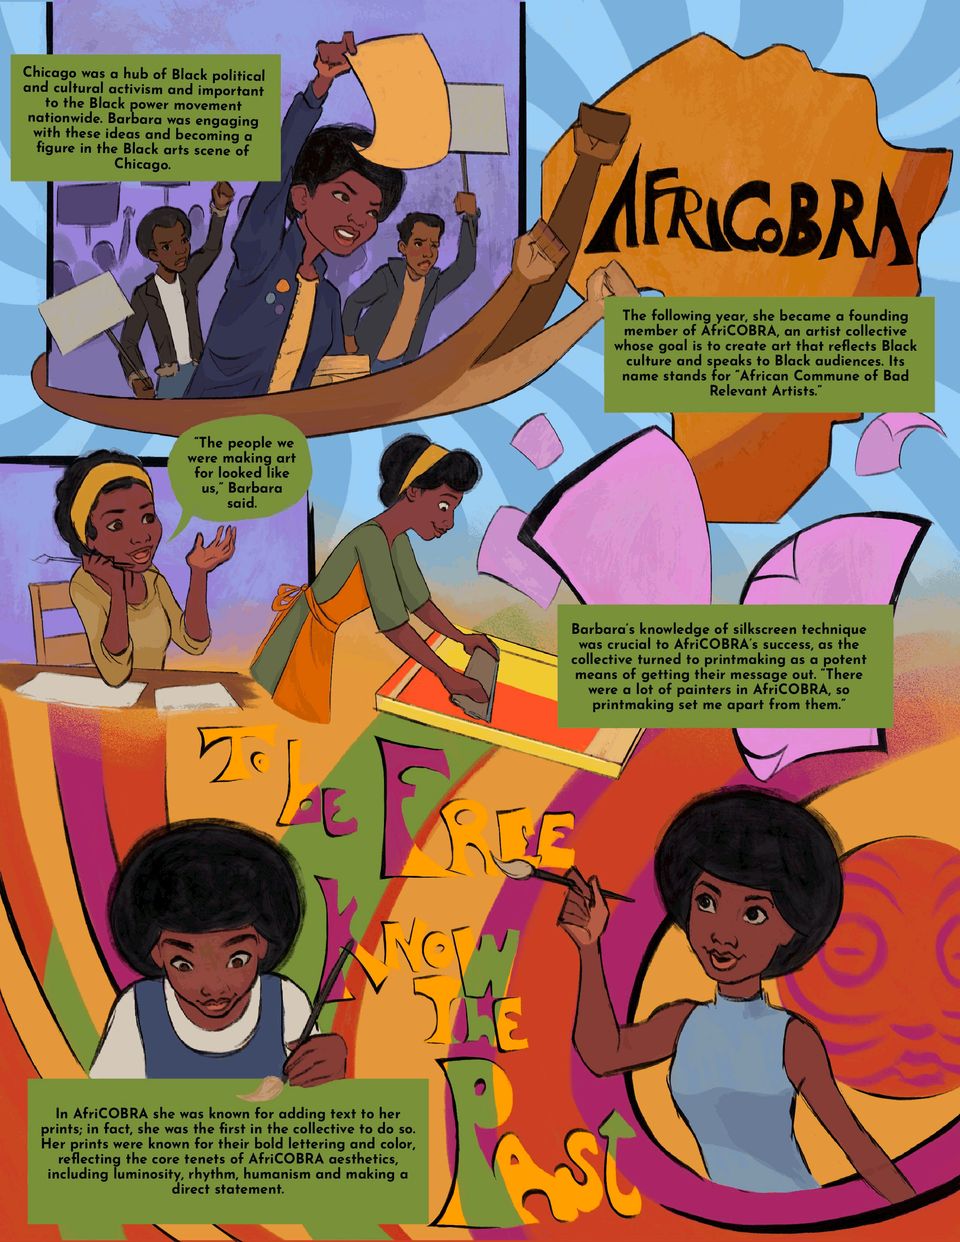 Illustrations of Barbara engaging in the Black arts scene and making work for AfriCOBRA with written description.